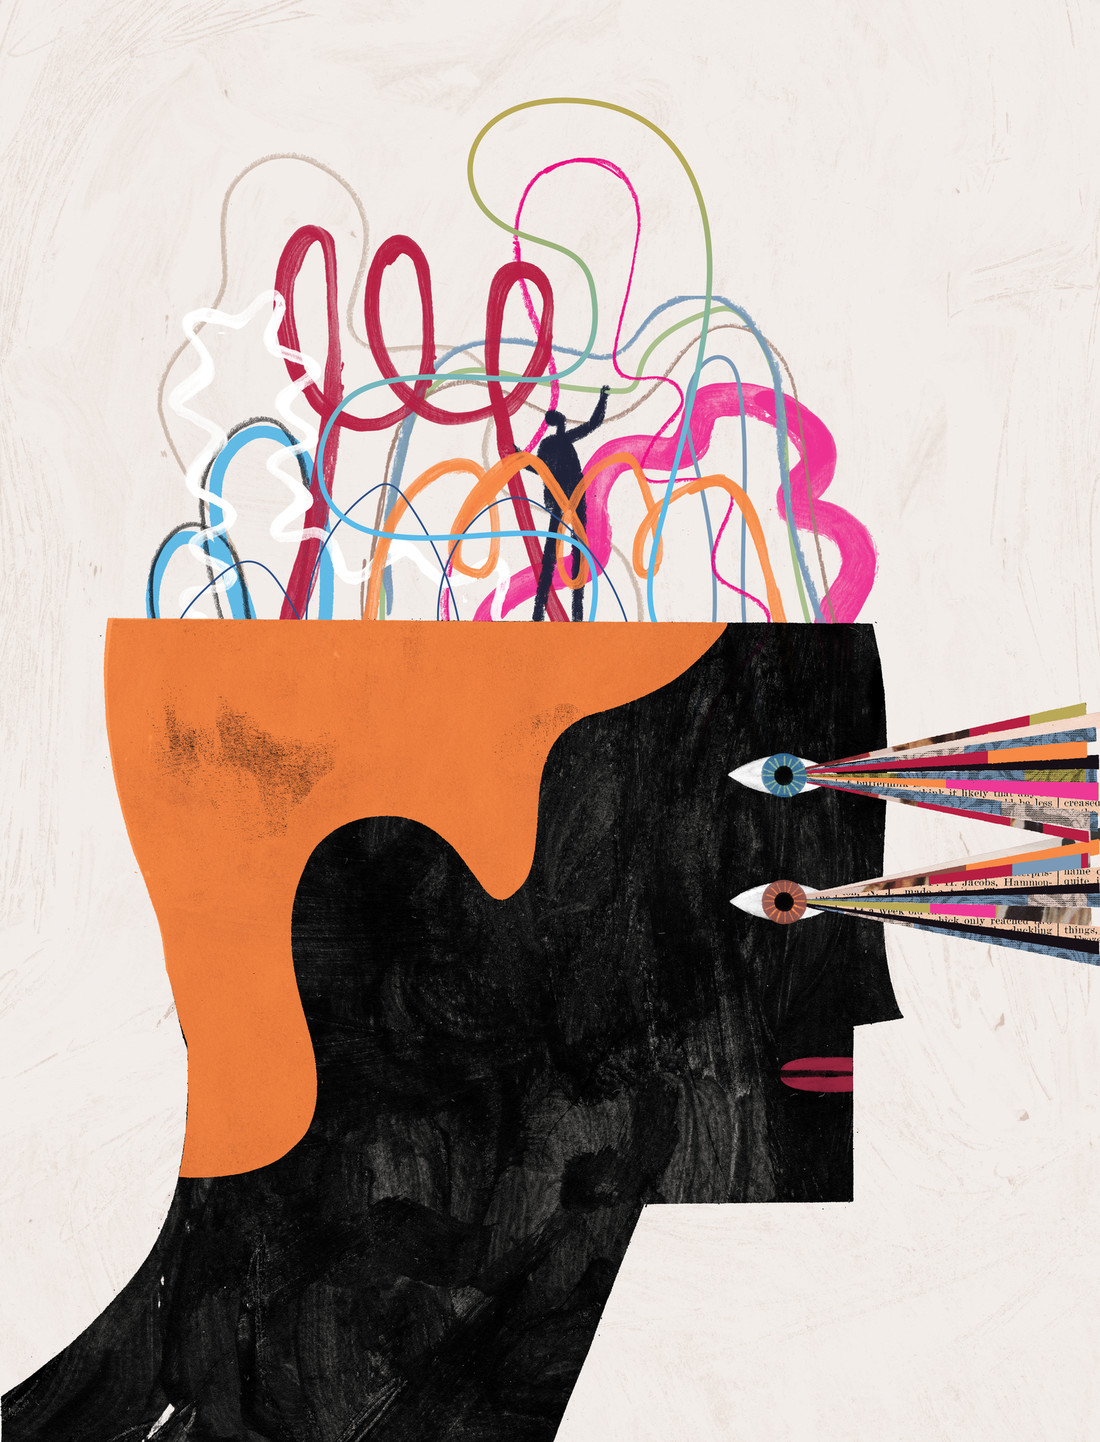 Abstract drawing of wires coming out of a persons' head